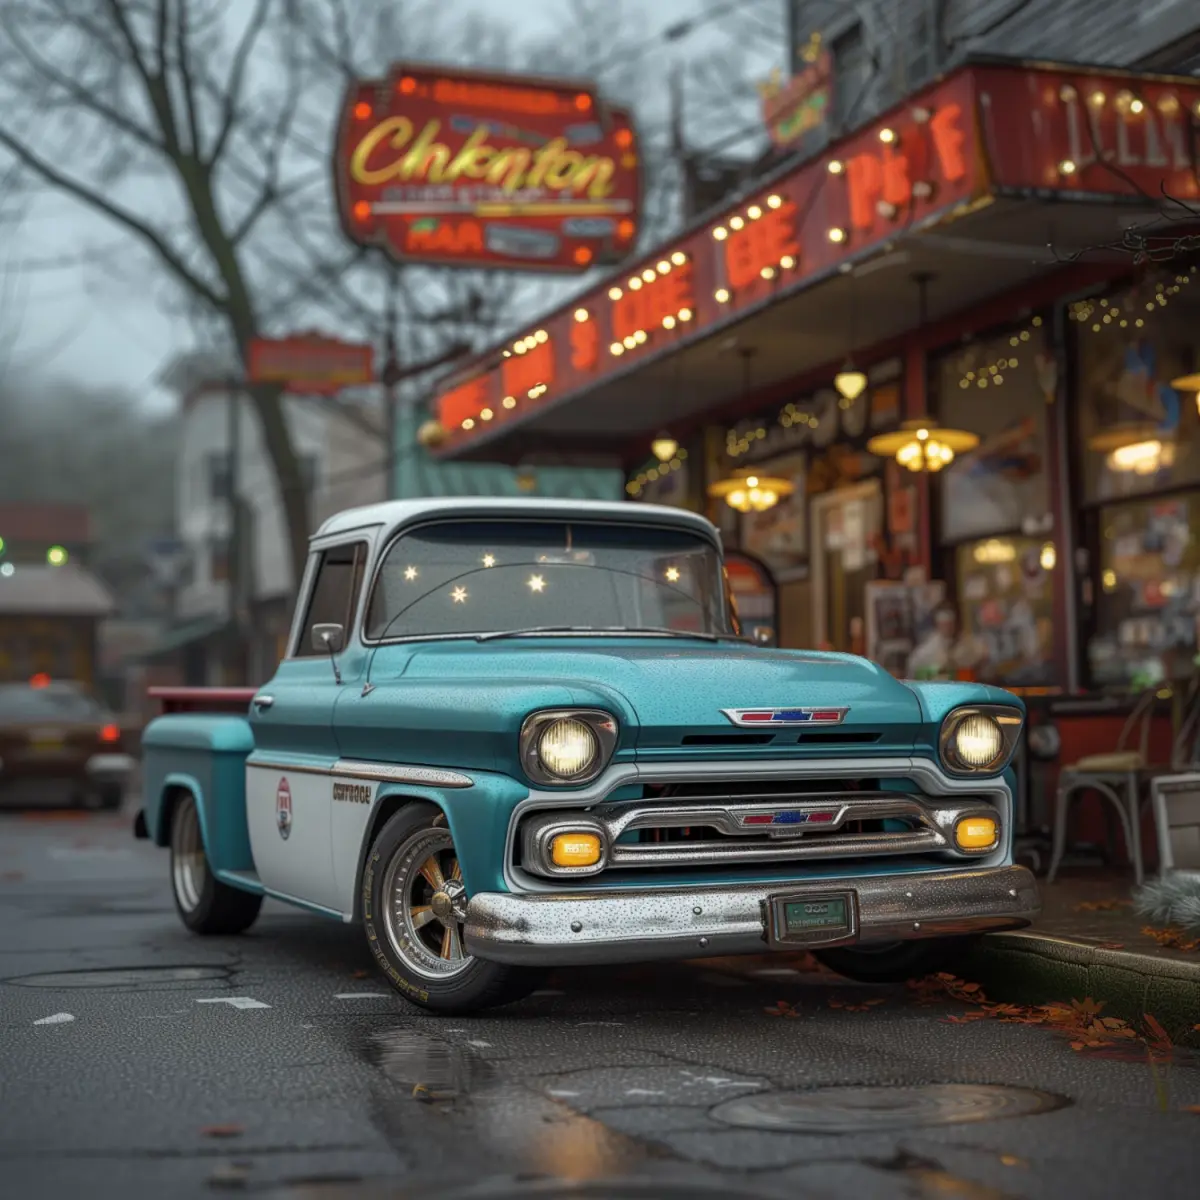 Classic Chevrolet C10 with a vibrant retro paint job in a suburban setting